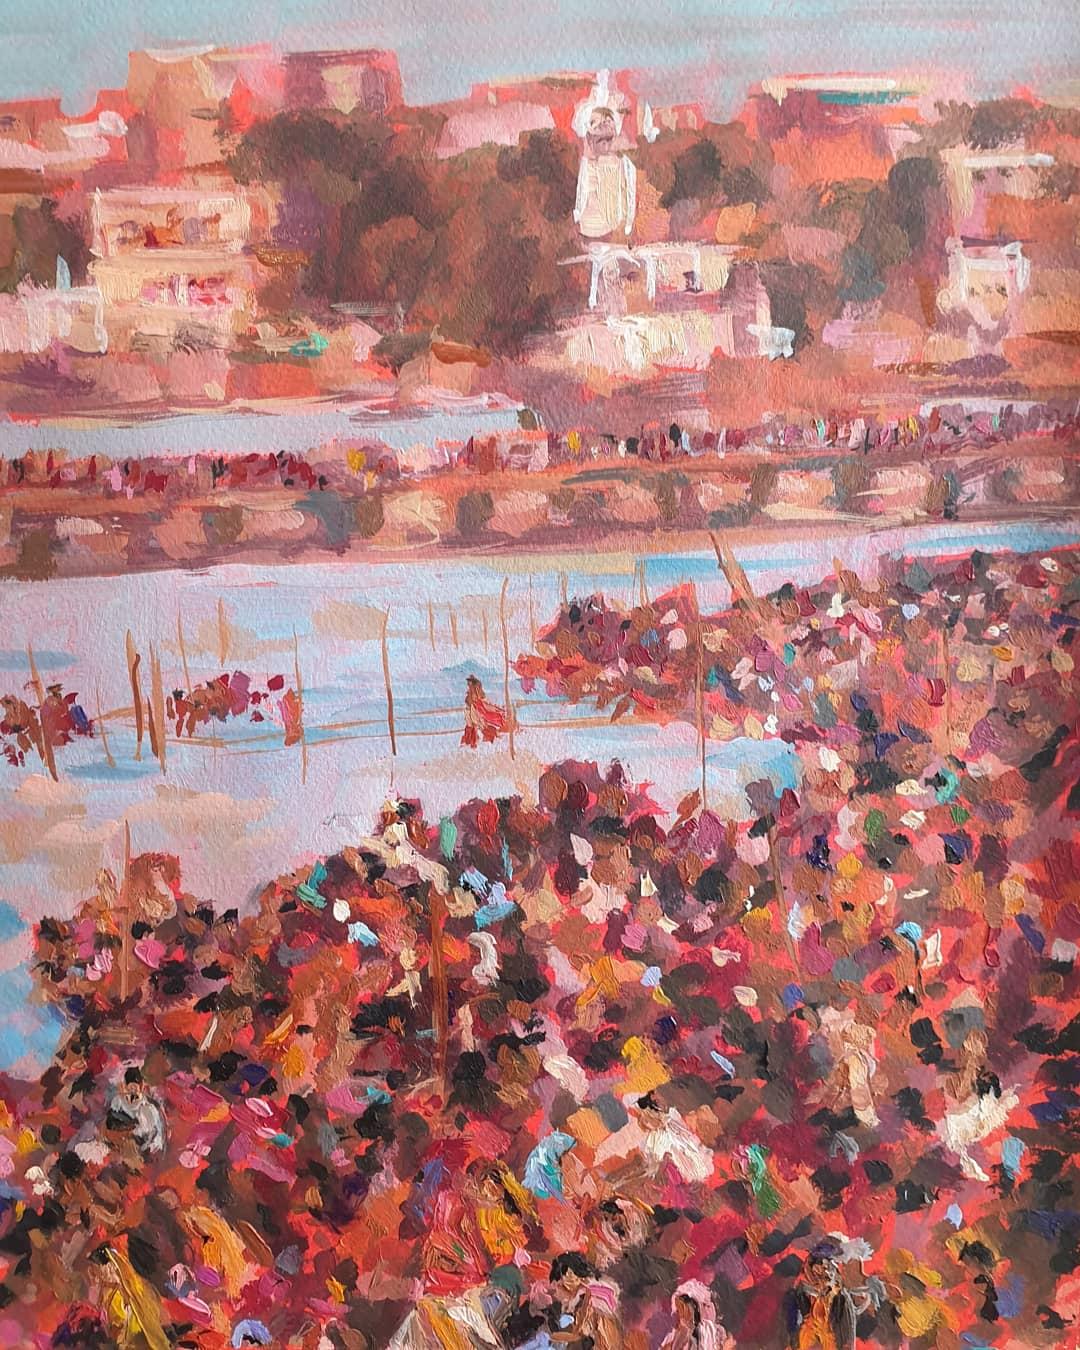 Crowd at the Ganges by Charmaine Chaudry, Contemporary art, Original art